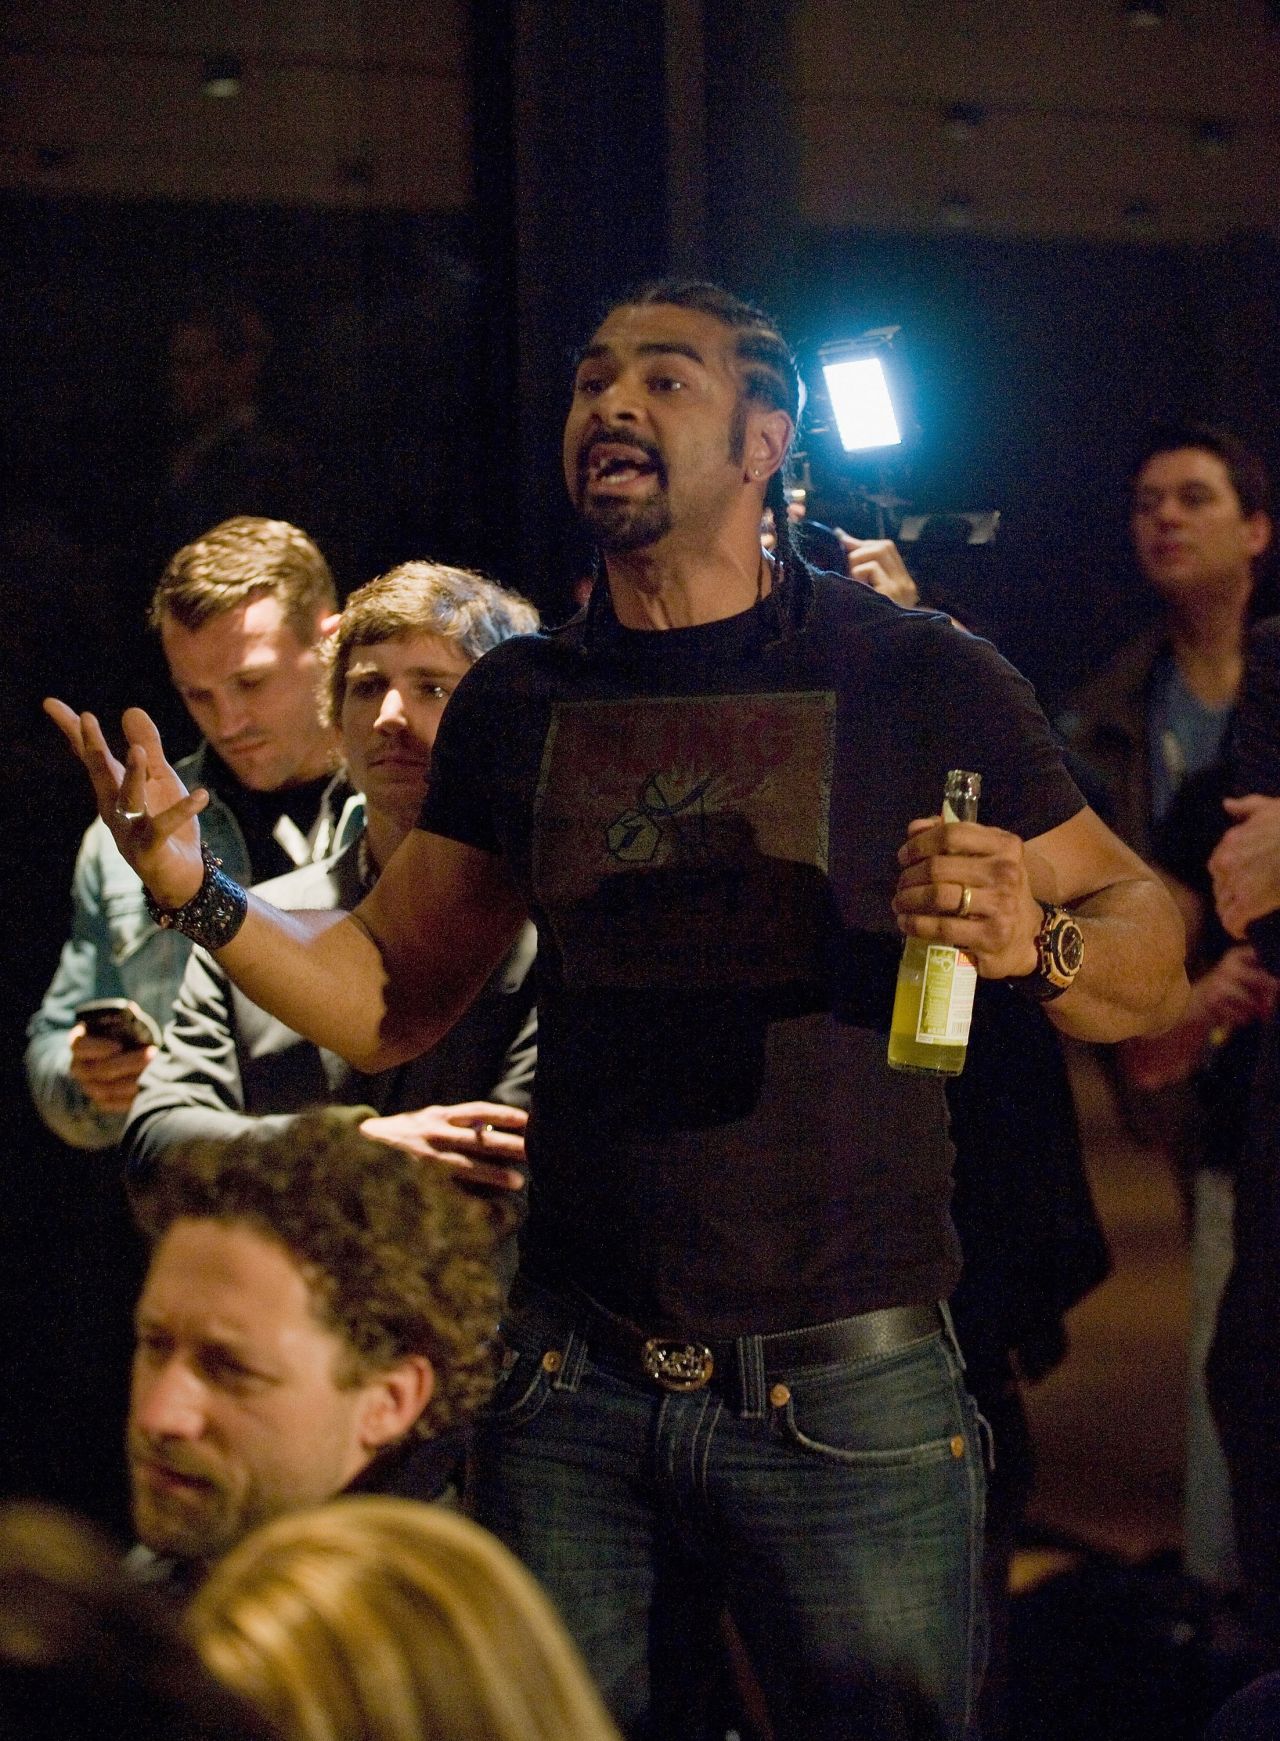 Former WBA heavyweight champion David Haye argues with Dereck Chisora moments before they brawled in Germany on Saturday.